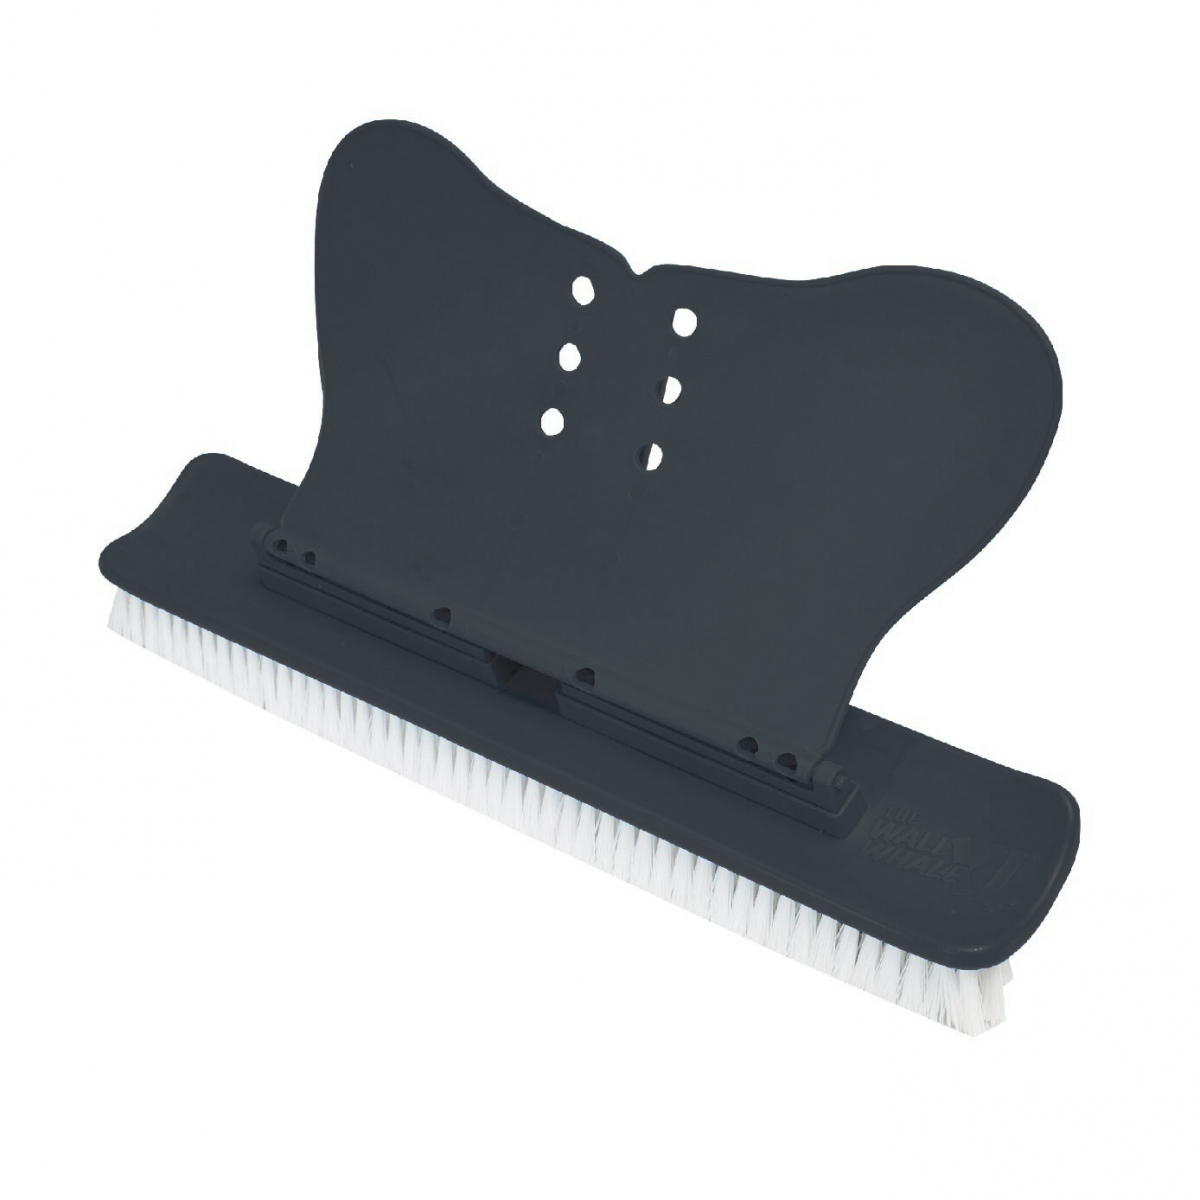 Smart Wall brush "Whale type", width 50 cm, grey RAL7016, single packing Smart Wall brush "Whale type", width 50 cm, grey RAL7016, single packing